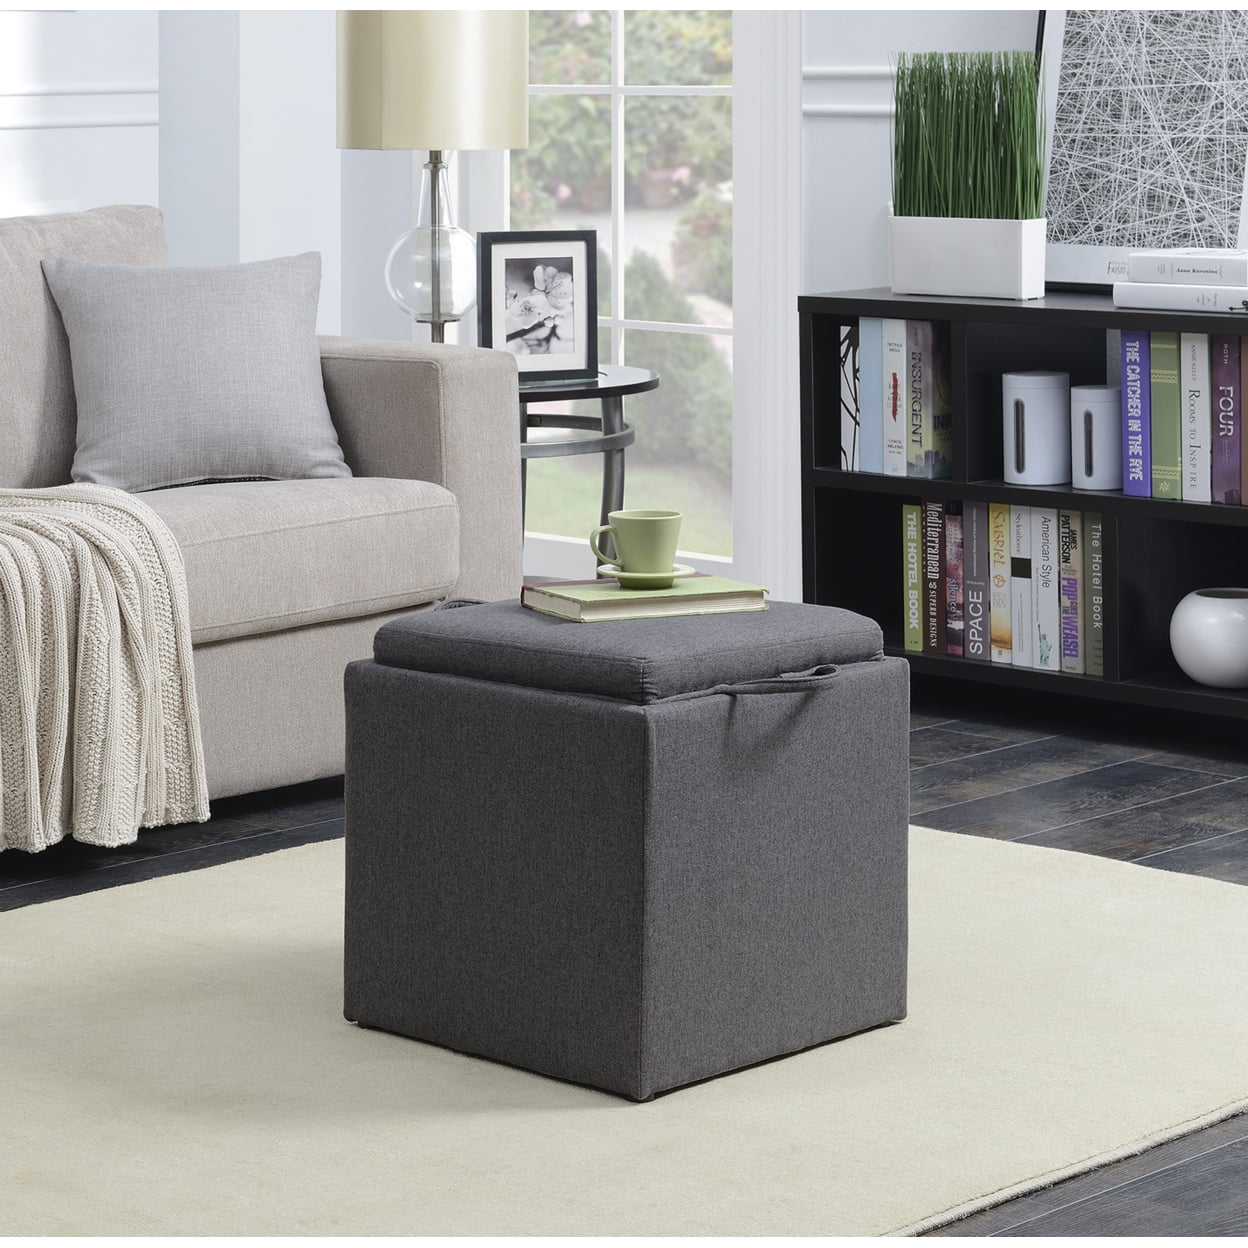 Picture of Convenience Concepts 143010FSGY Designs 4Comfort Park Avenue Single Ottoman With Stool, Soft Gray Fabric